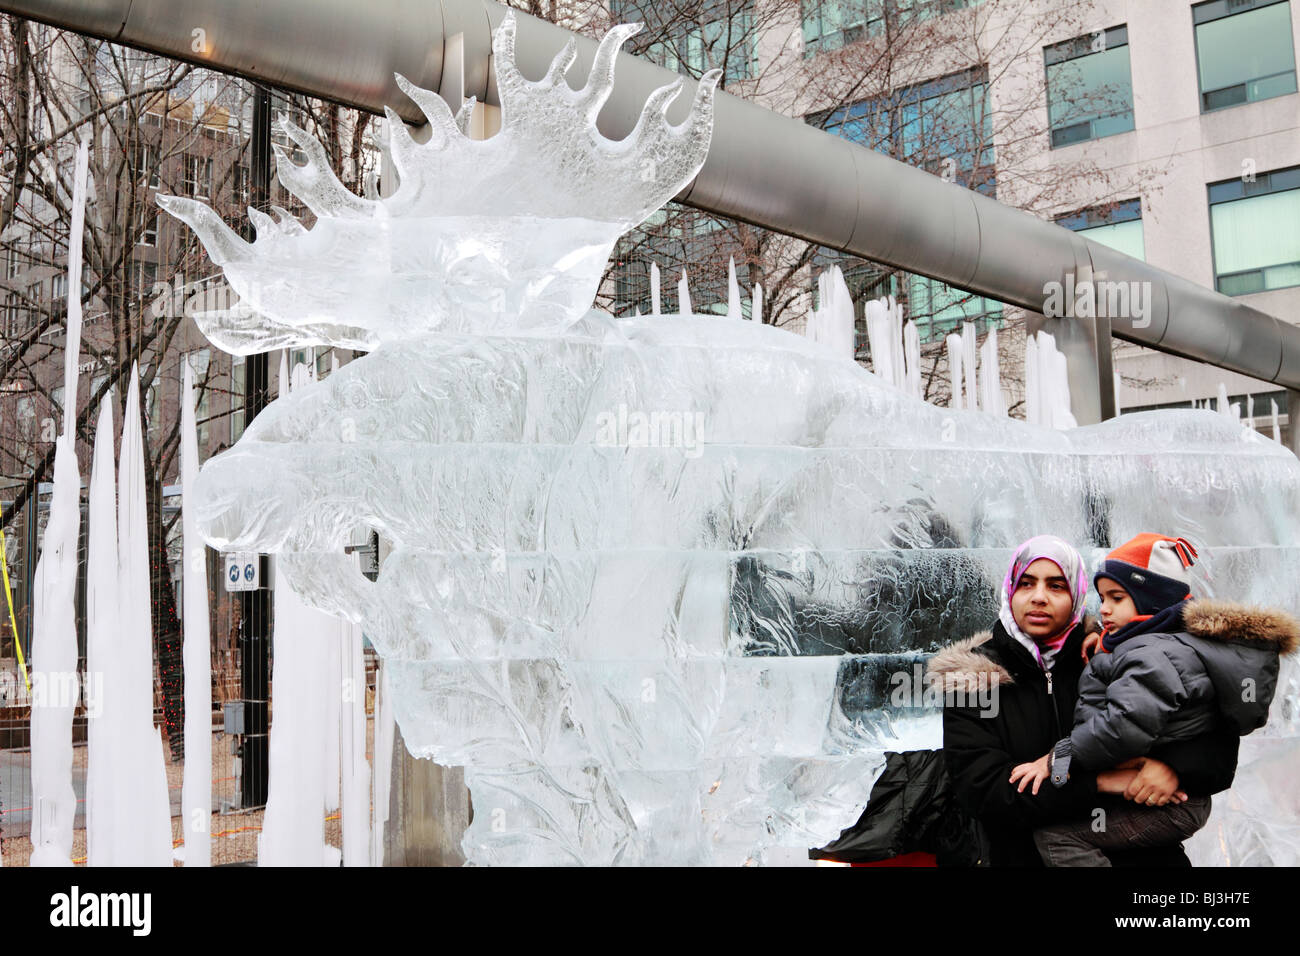 Ice sculpture of giant moose with people posing around it in Yorkville IceFest in Toronto 2010 Stock Photo